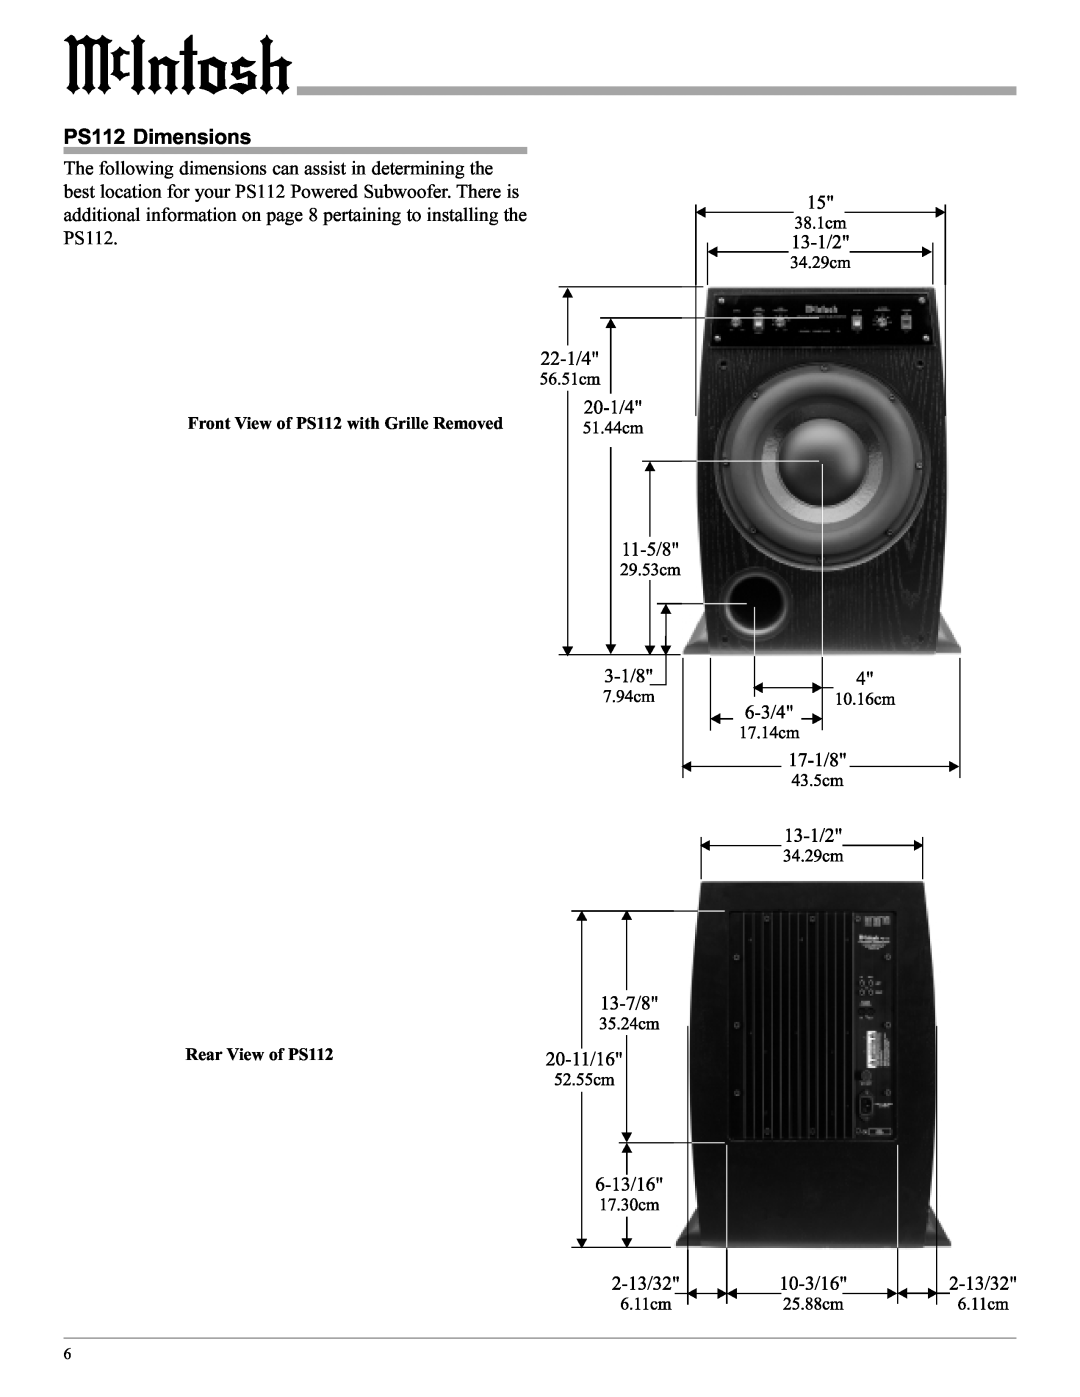 McIntosh manual PS112 Dimensions, Front View of PS112 with Grille Removed, Rear View of PS112 